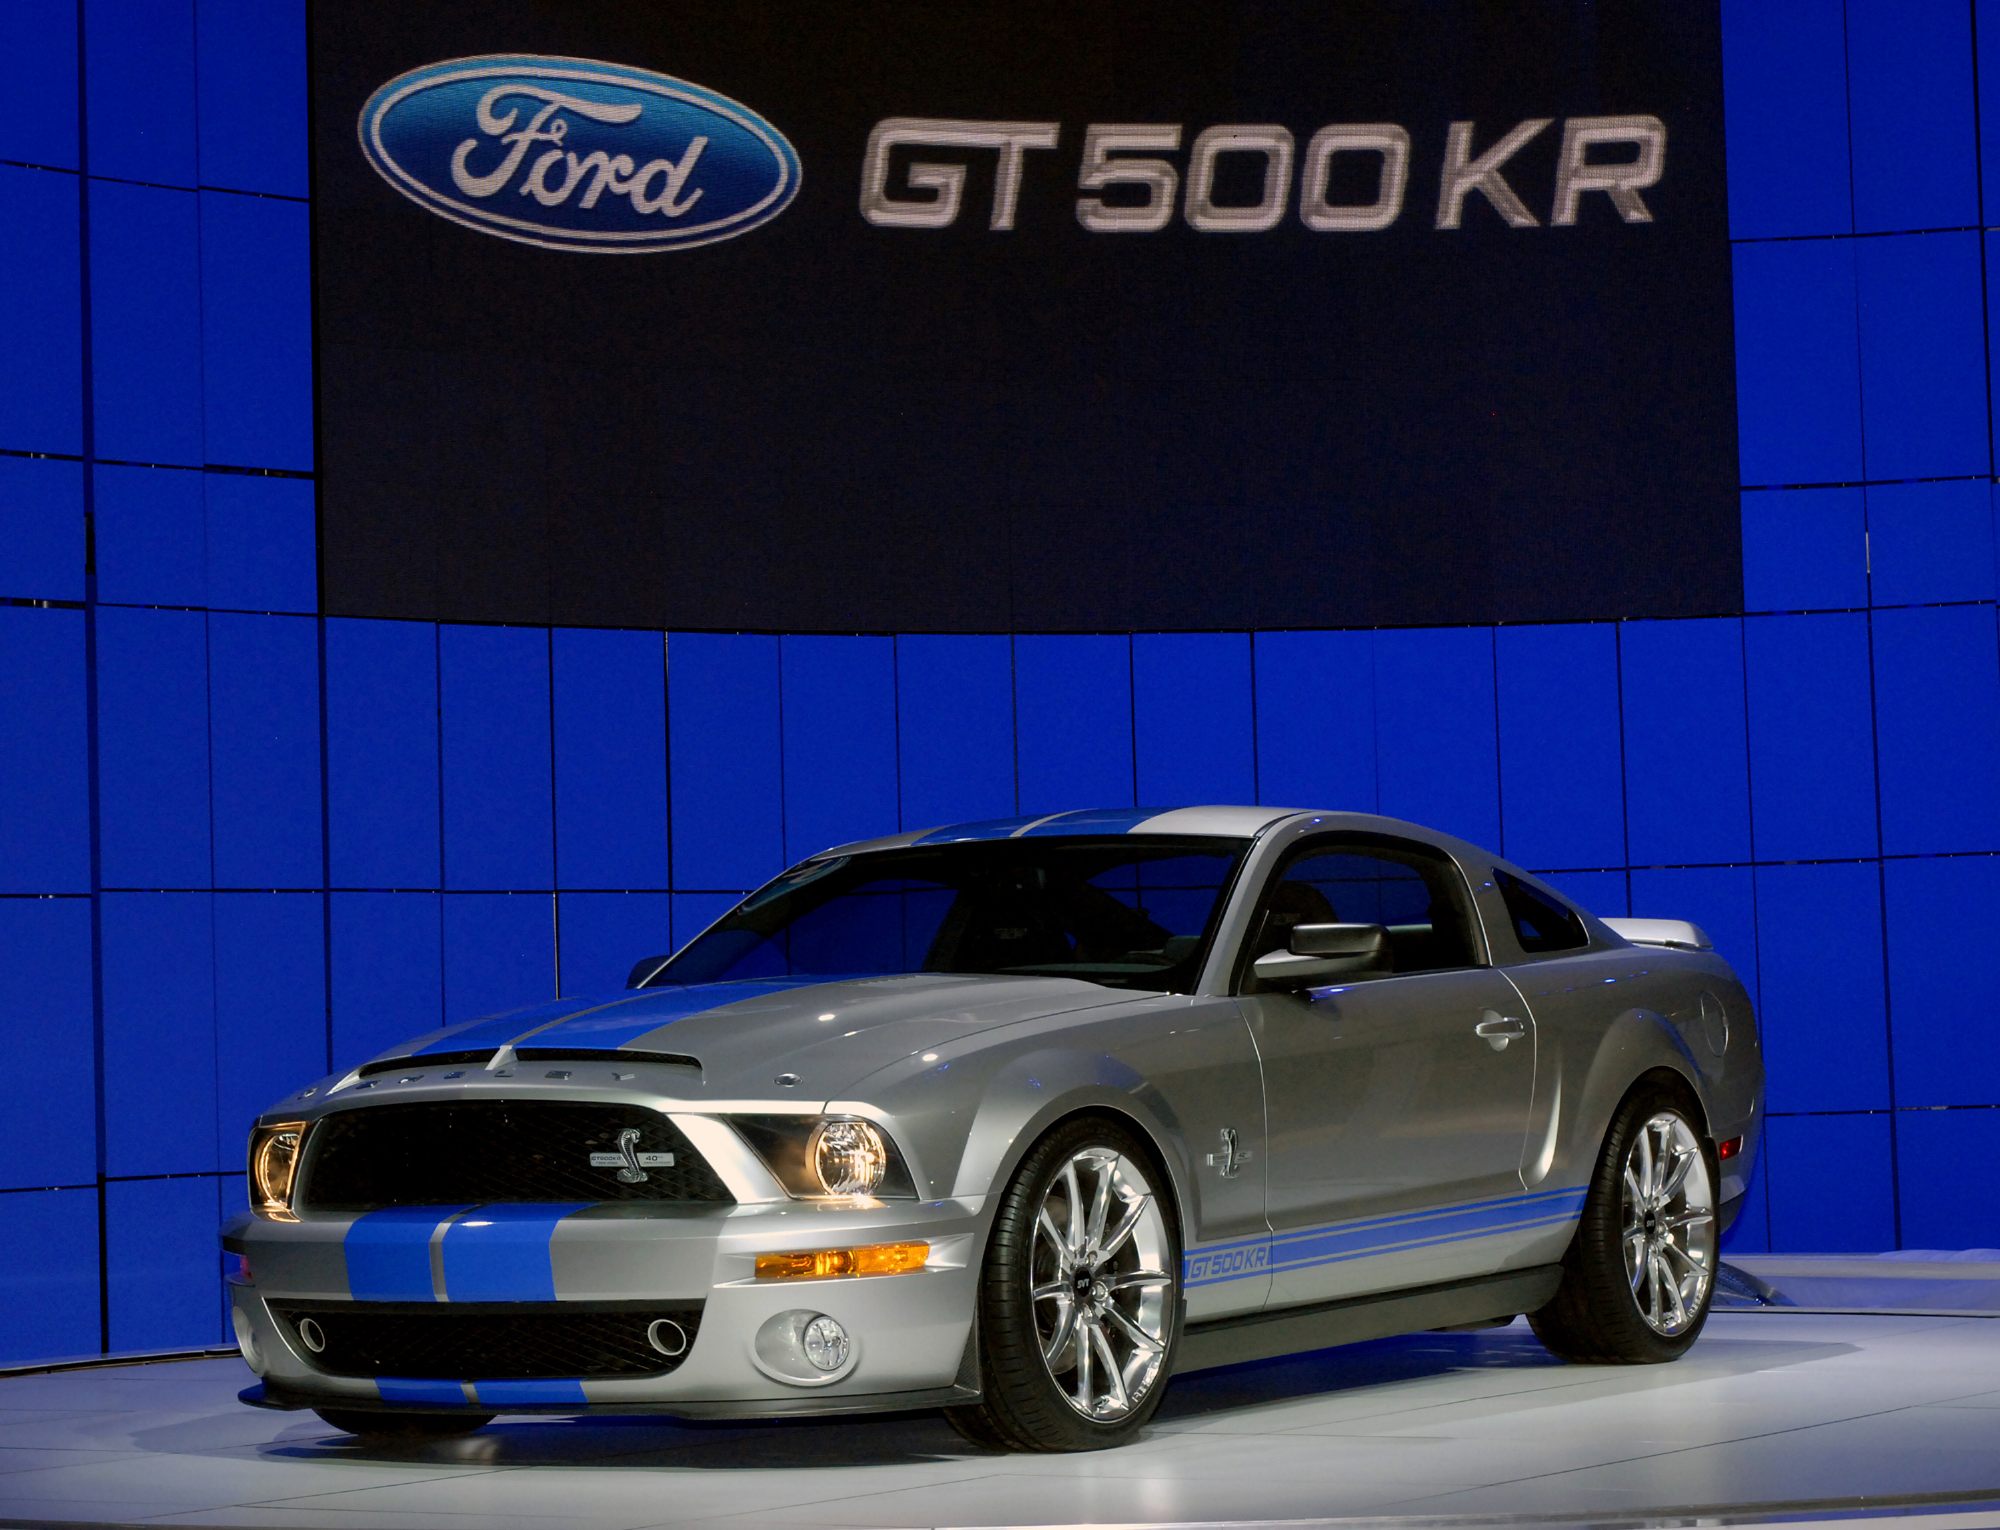 Ford Mustang Shelby GT 500 KR